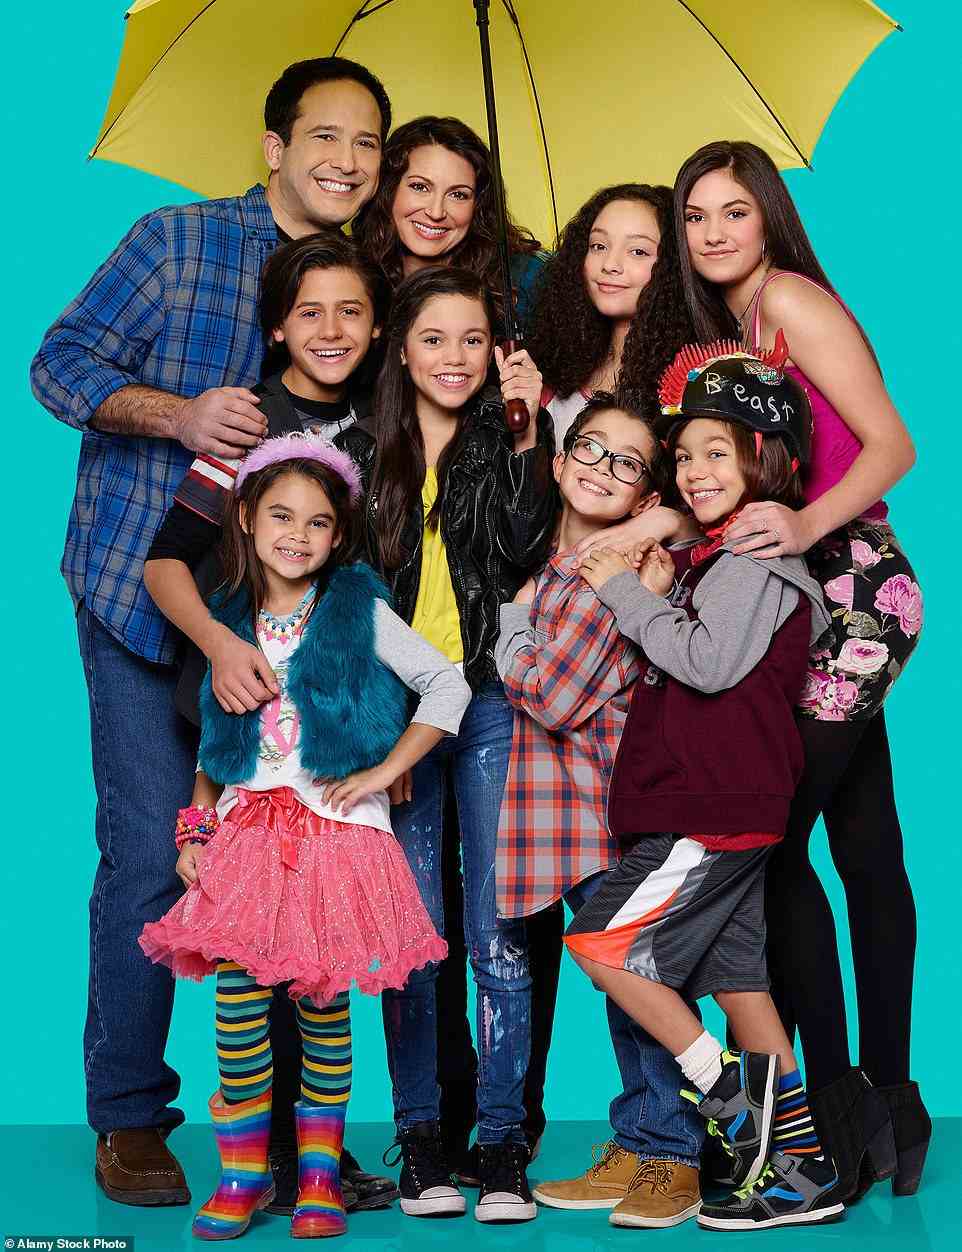 In 2016, when Jenna was 14 years old, she landed the lead role in Disney Channel's Stuck in the Middle, which propelled her even further into the spotlight. It went on for three seasons, and followed the Diaz family